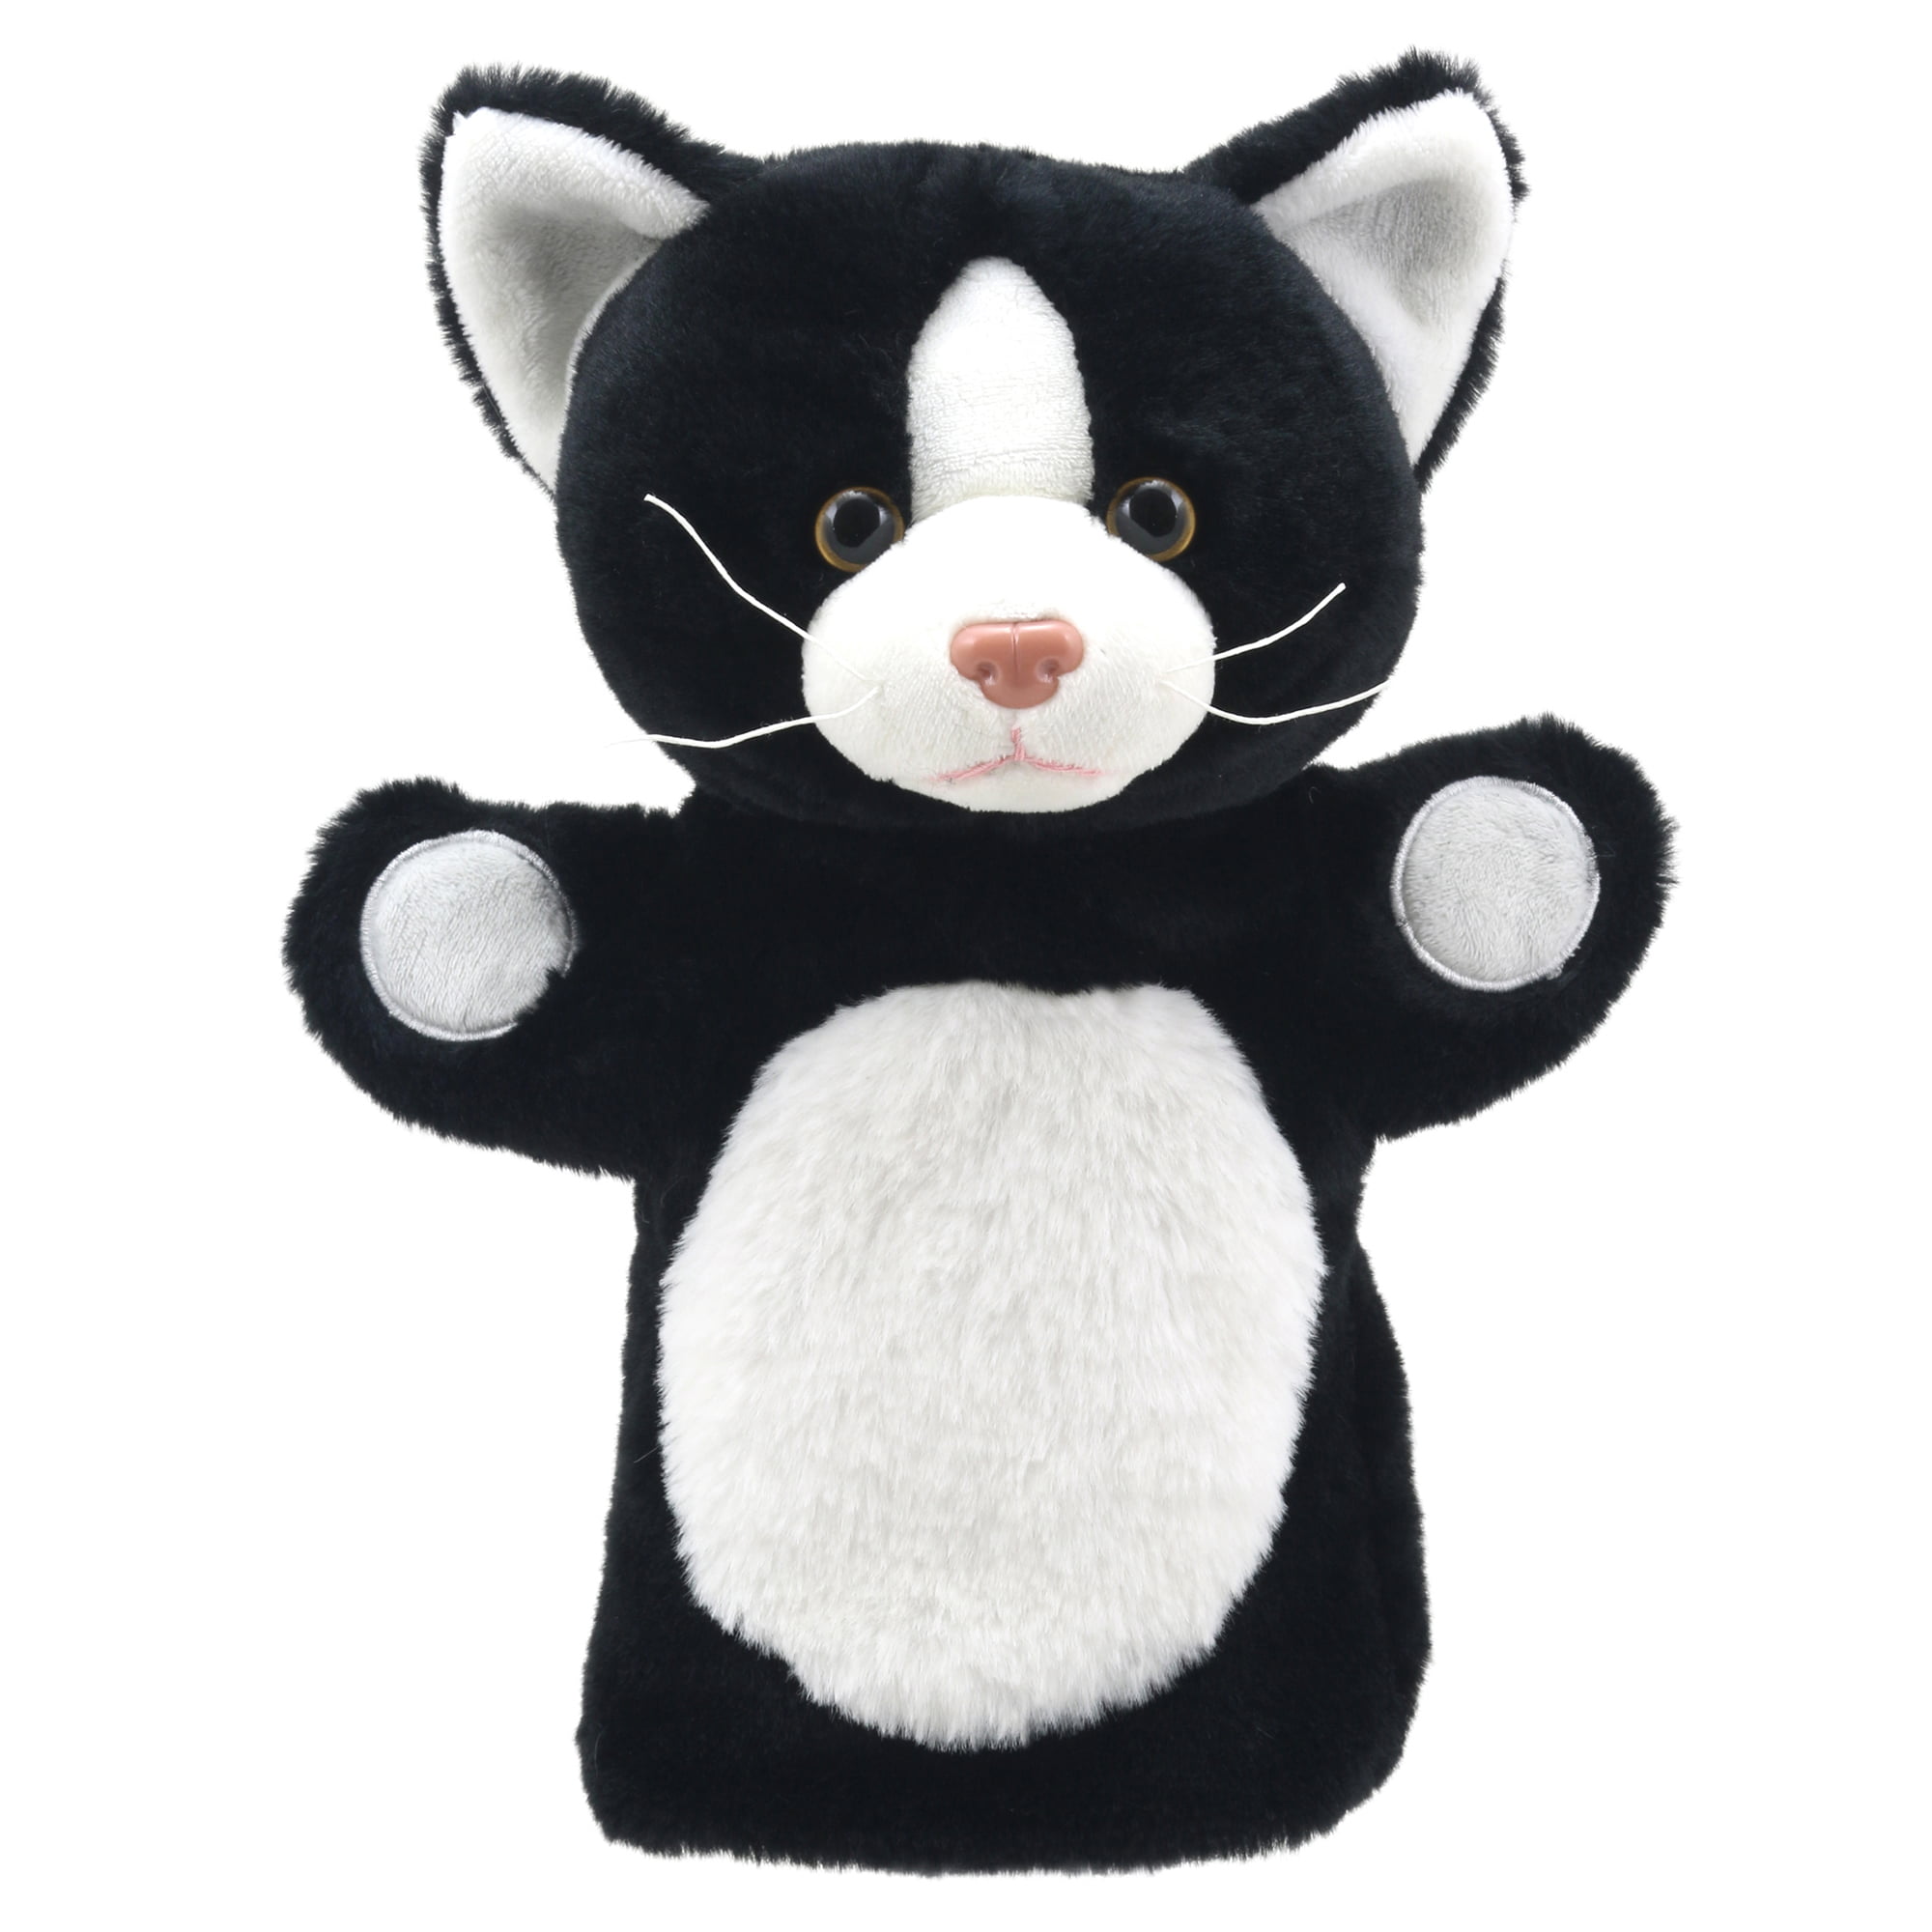 BLACK CAT PUPPET 2987 ~ FREE SHIPPING to USA ~ Folkmanis Puppets 